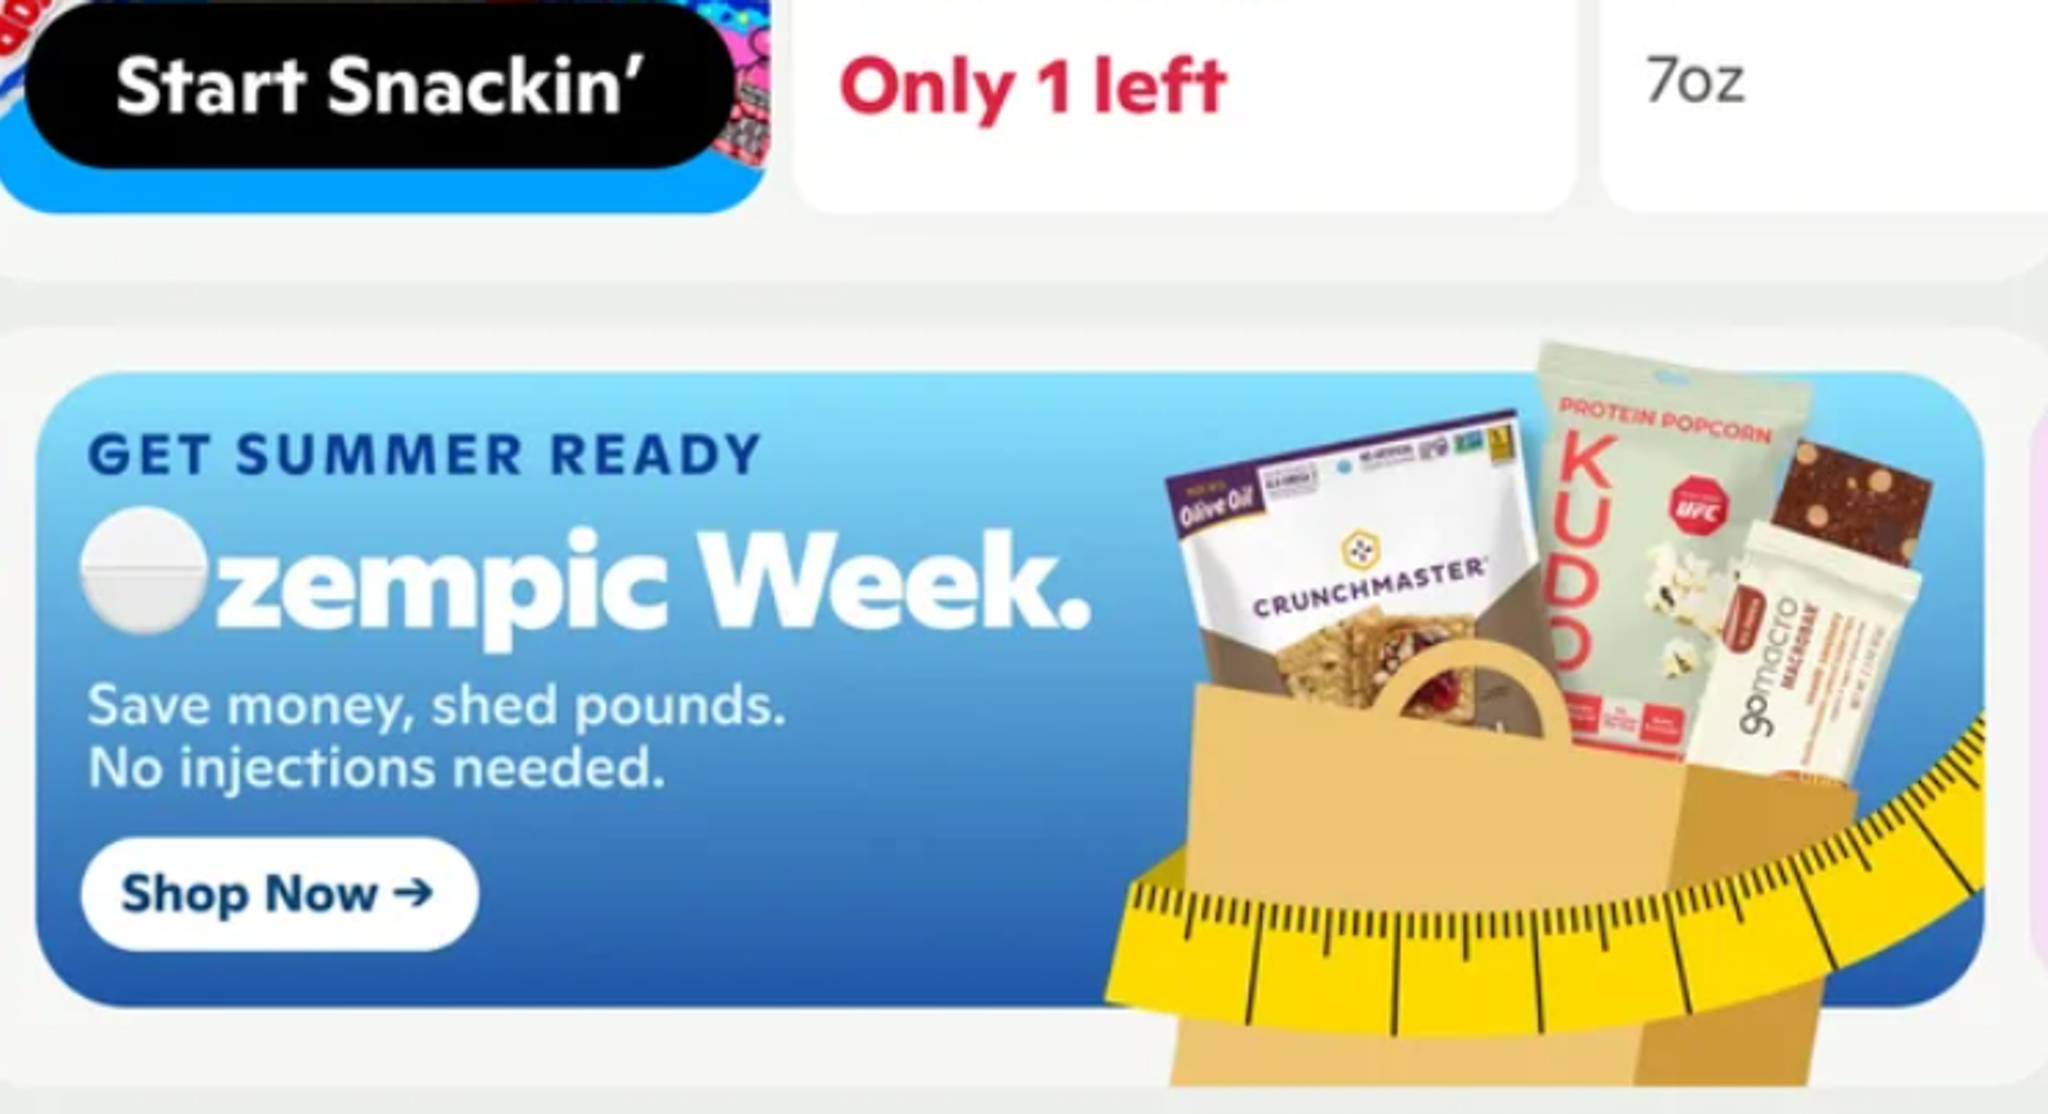 Gopuff’s Ozempic ad promotes toxic diet culture